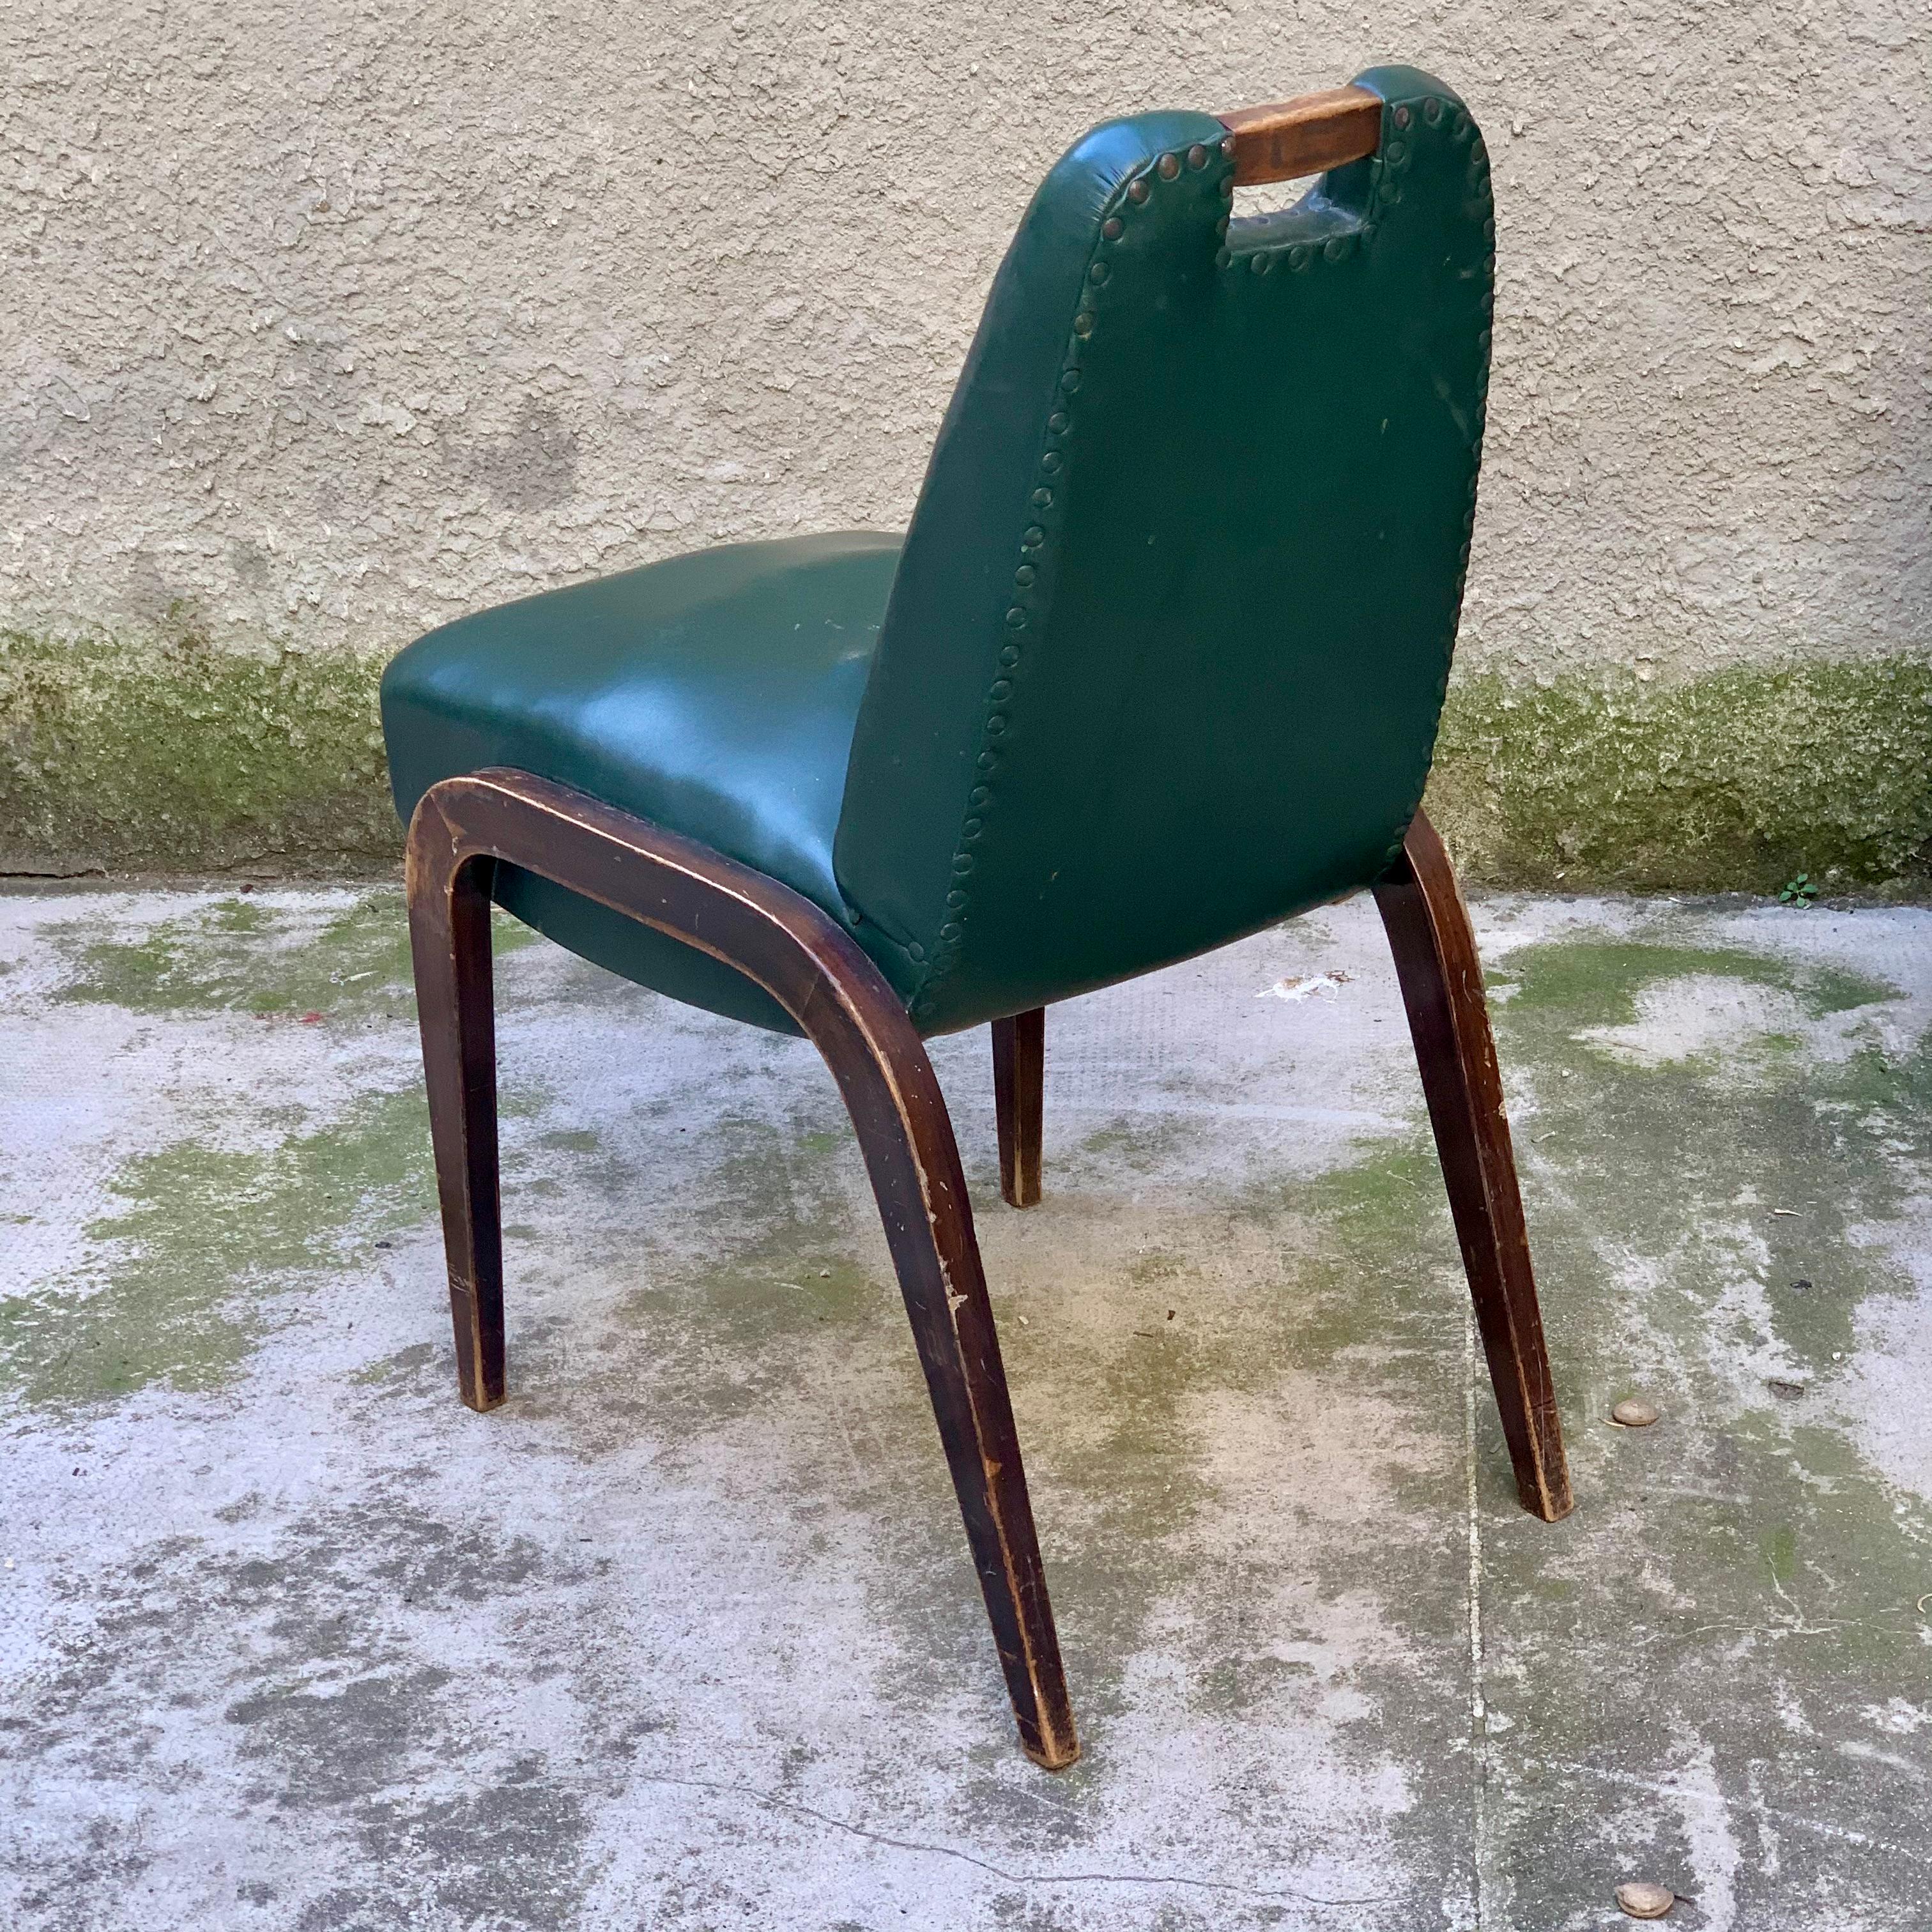 Set of 4 Wood and Leatherette Chairs - Italy - 1930s For Sale 4